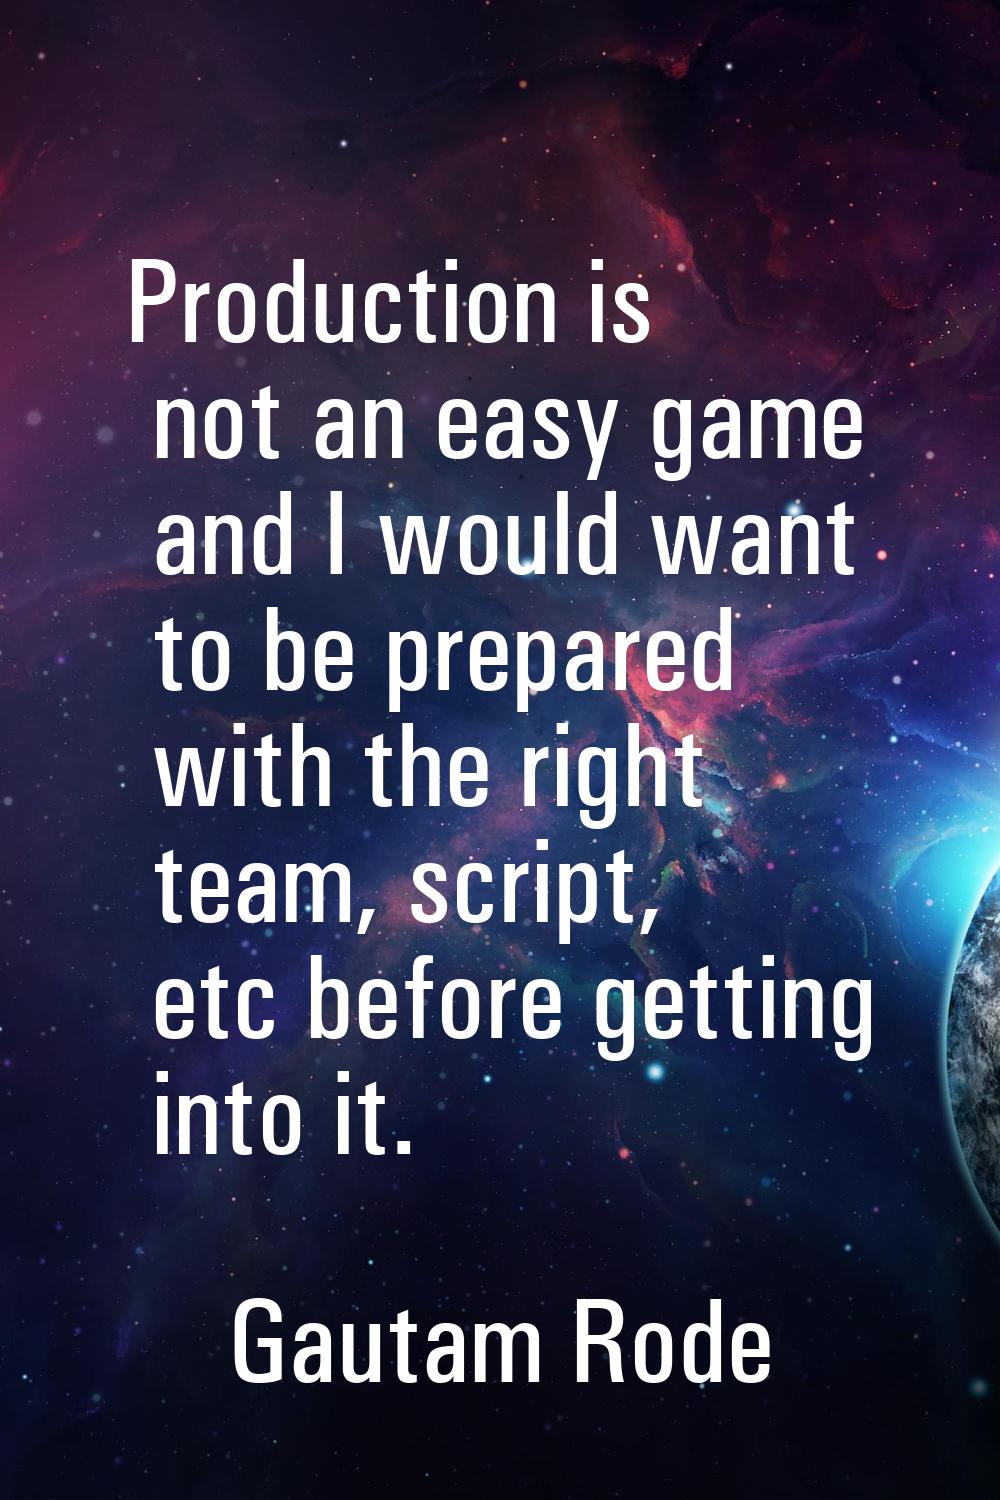 Production is not an easy game and I would want to be prepared with the right team, script, etc bef